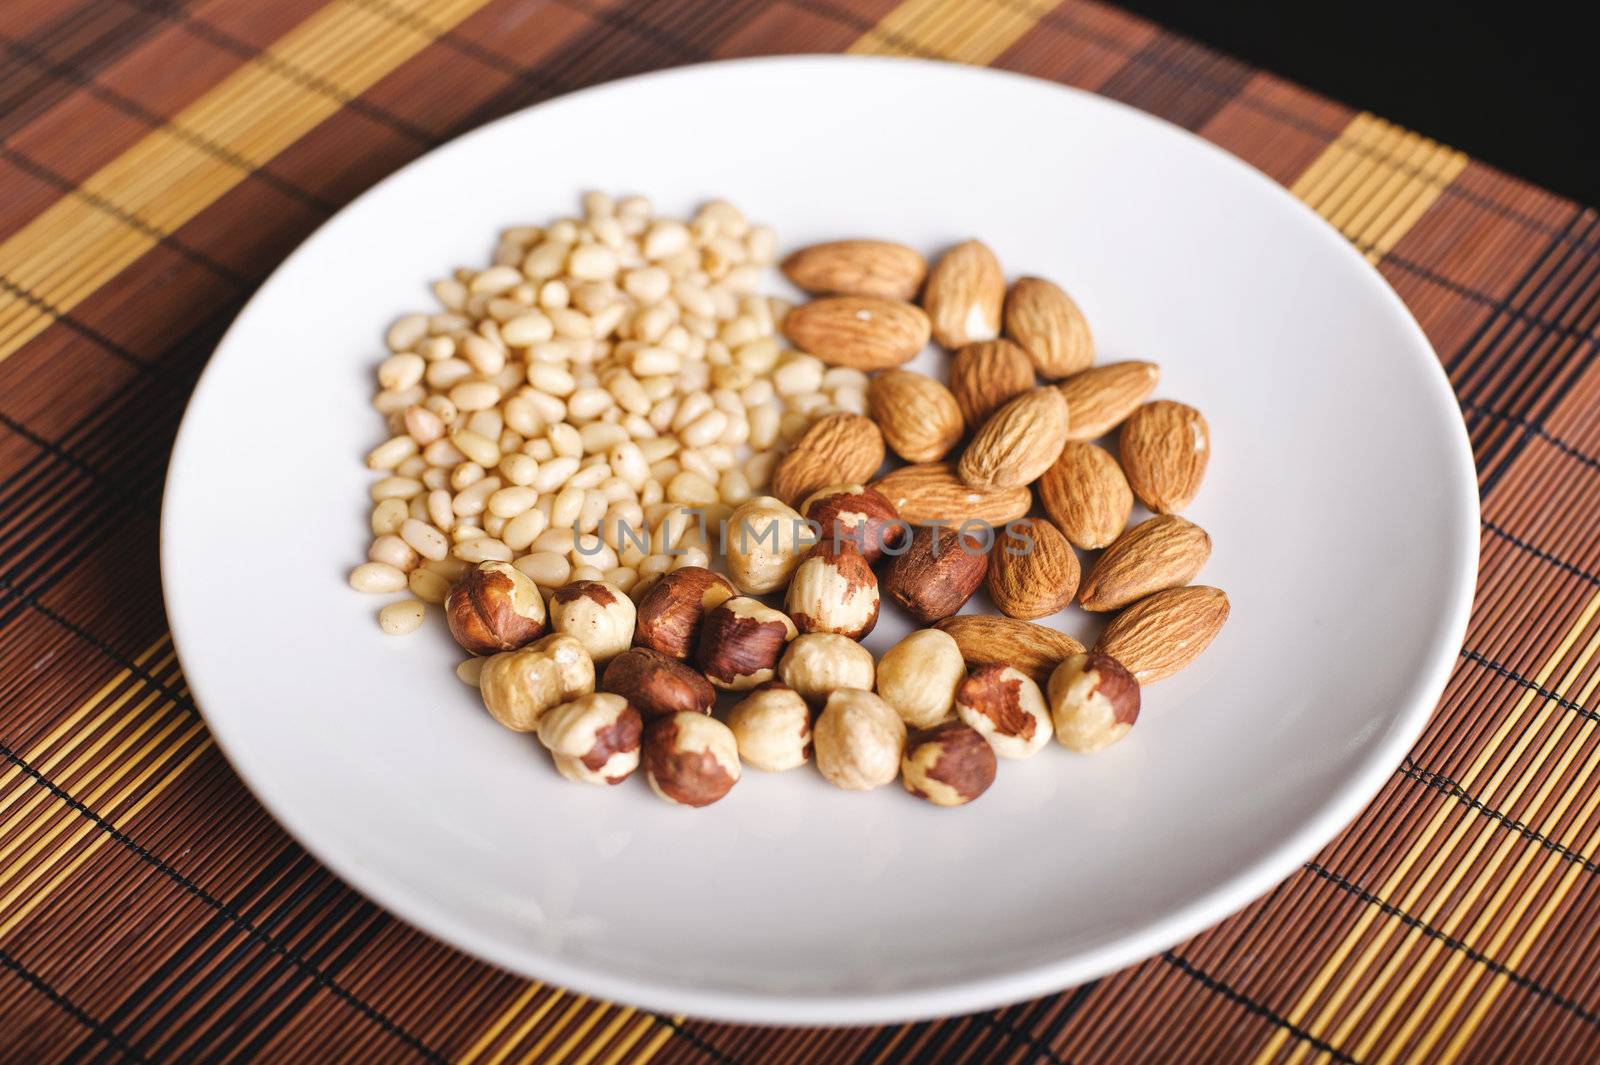 Mixed nuts on a white plate and brown table-napkin